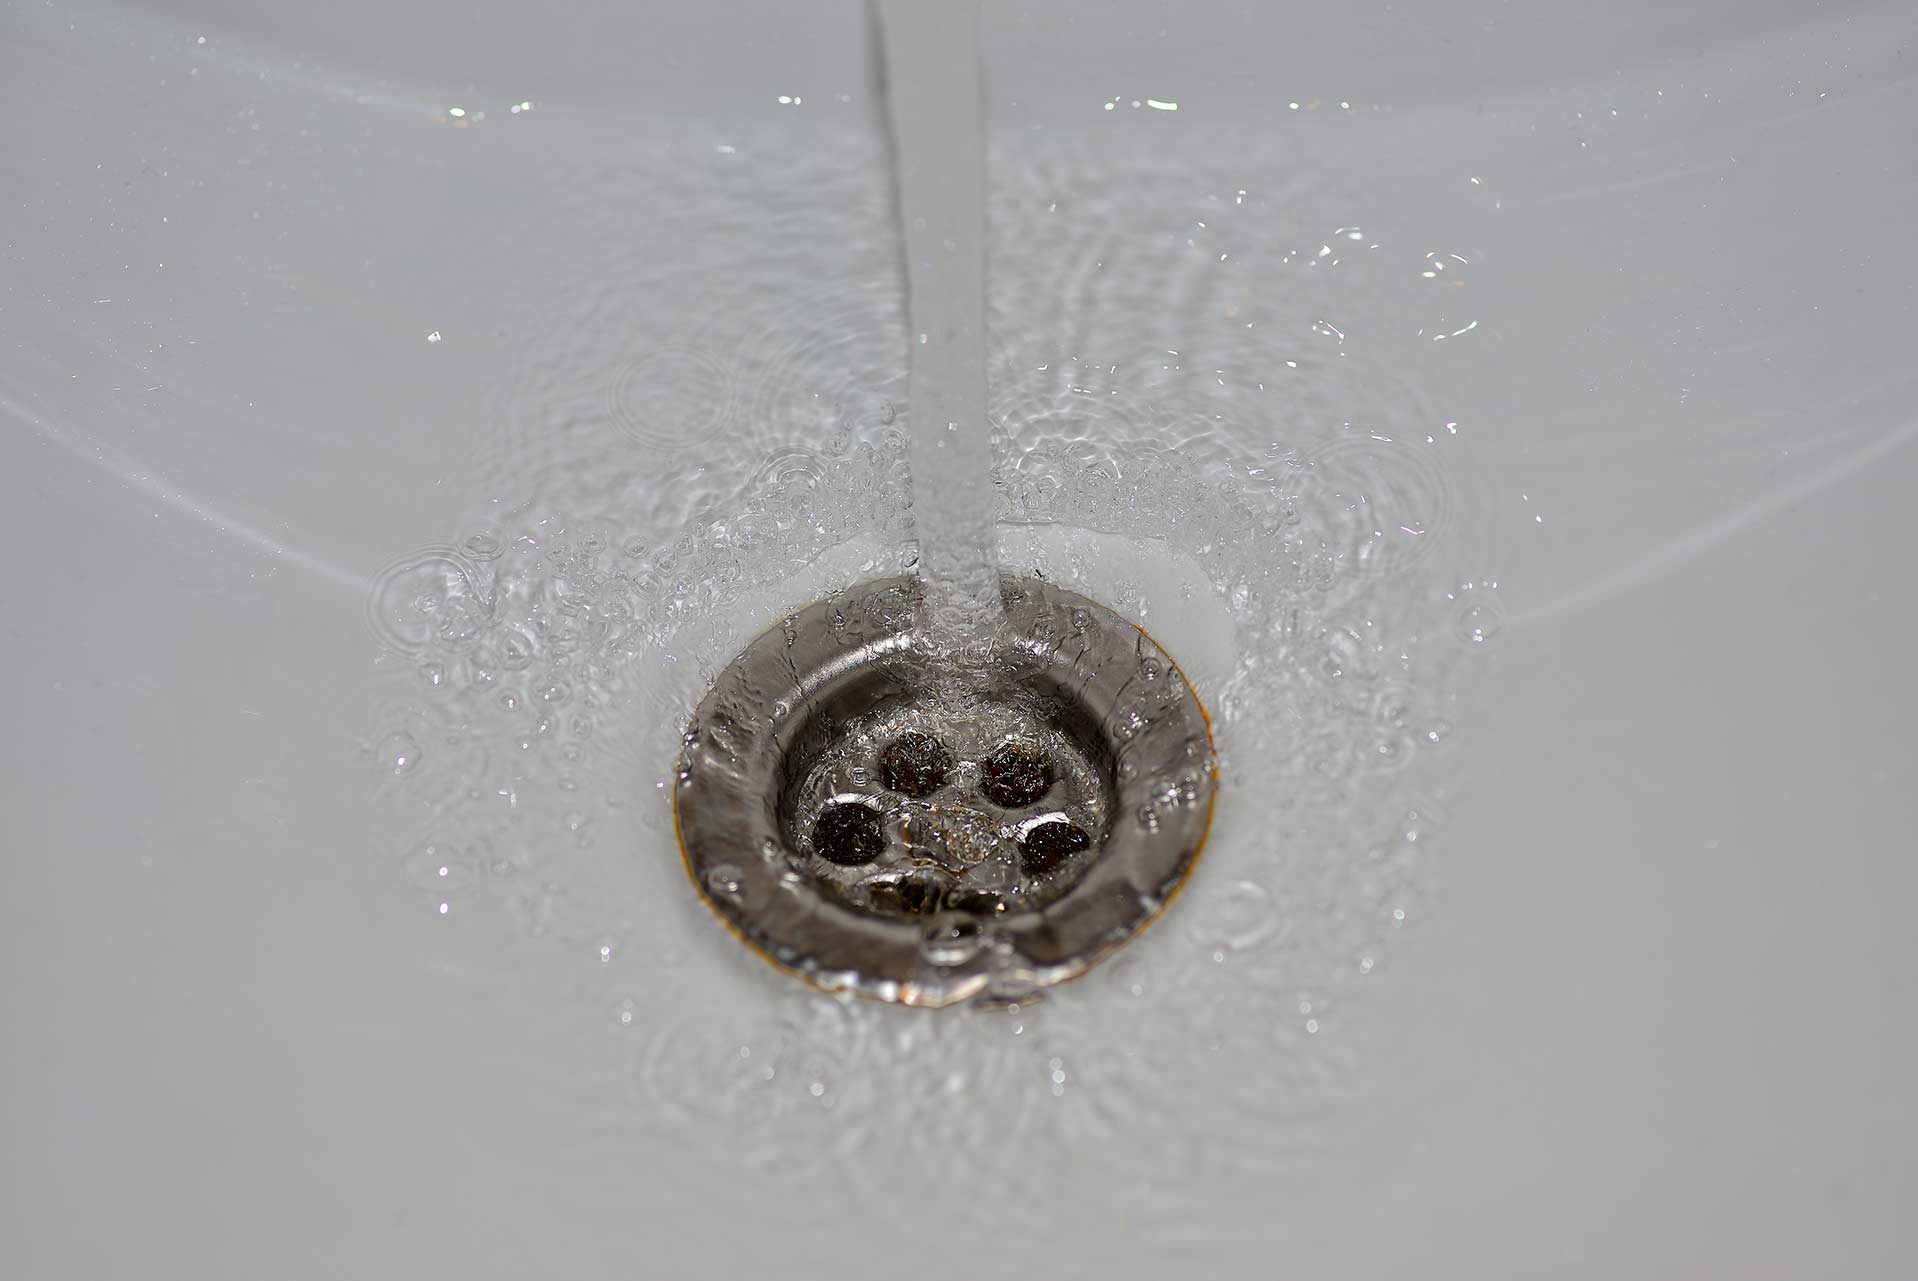 A2B Drains provides services to unblock blocked sinks and drains for properties in Hemel Hempstead.